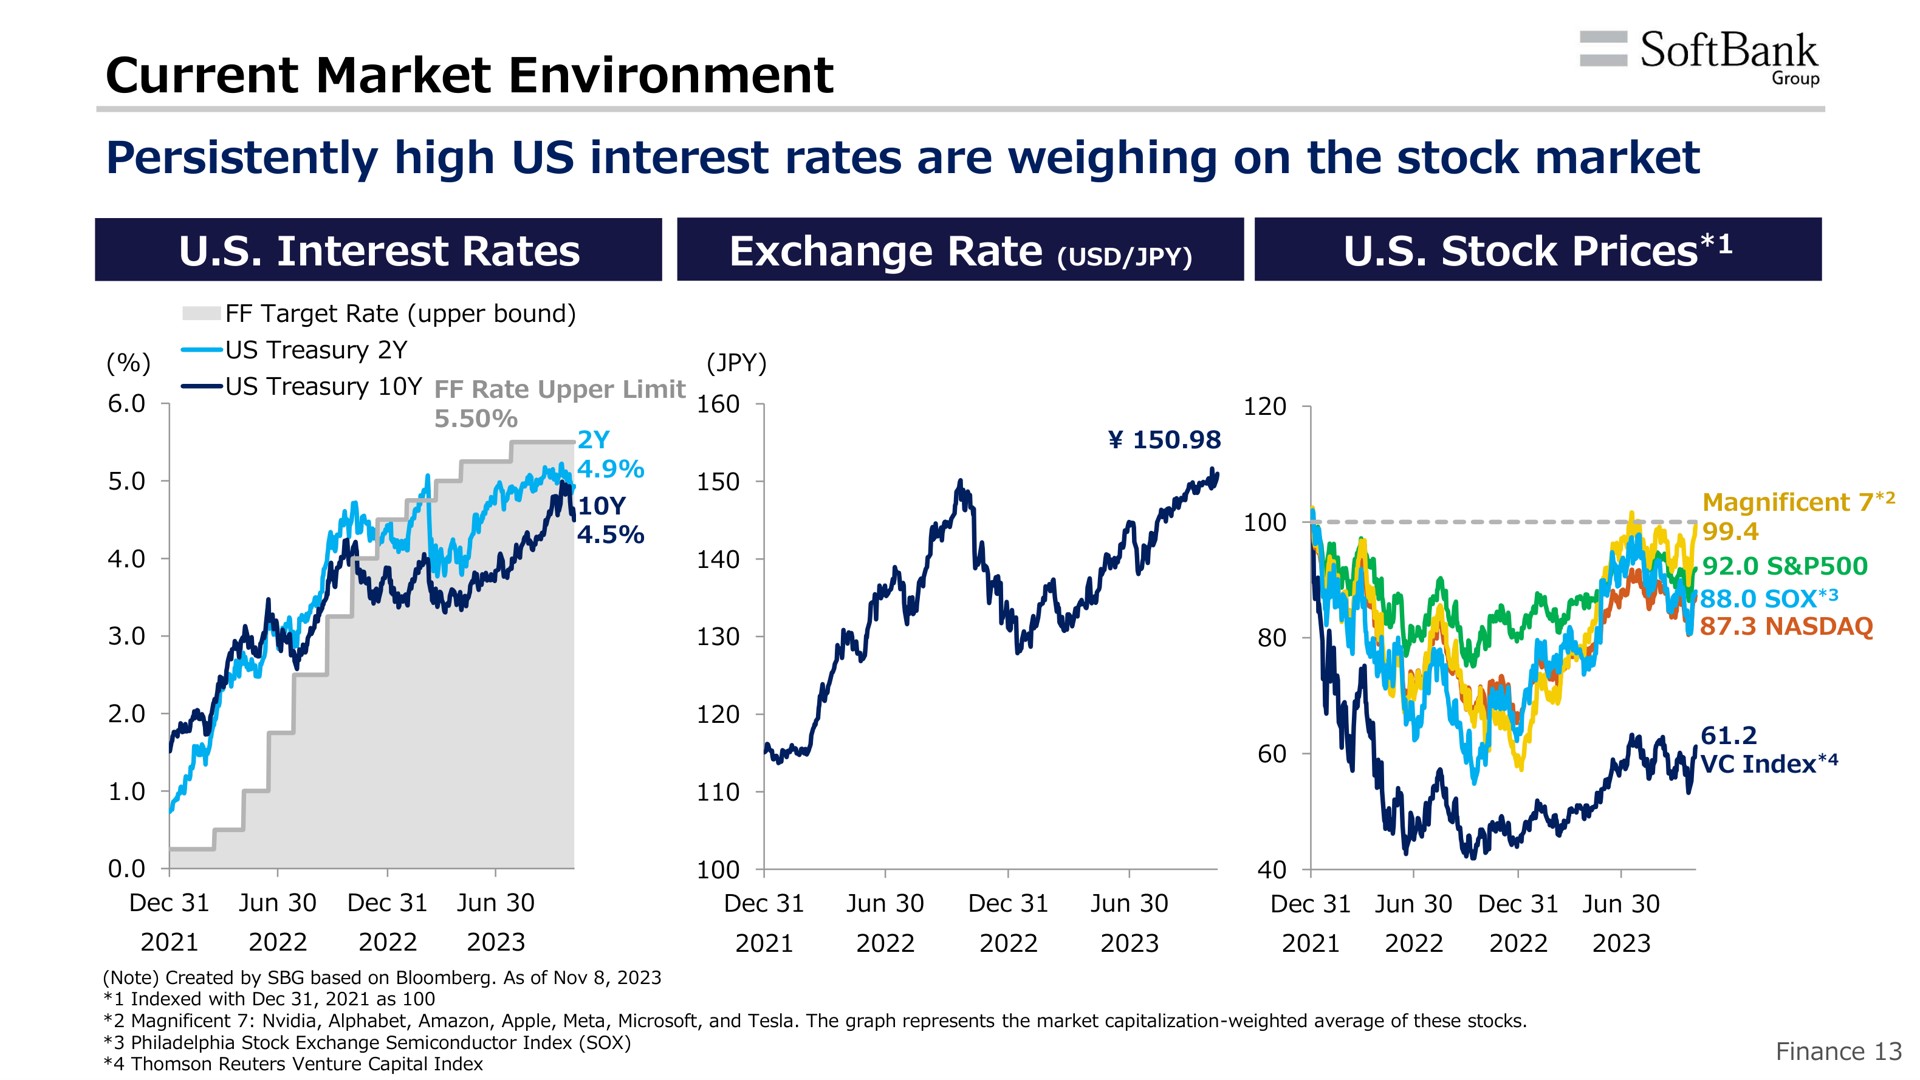 current market environment persistently high us interest rates are weighing on the stock market | SoftBank